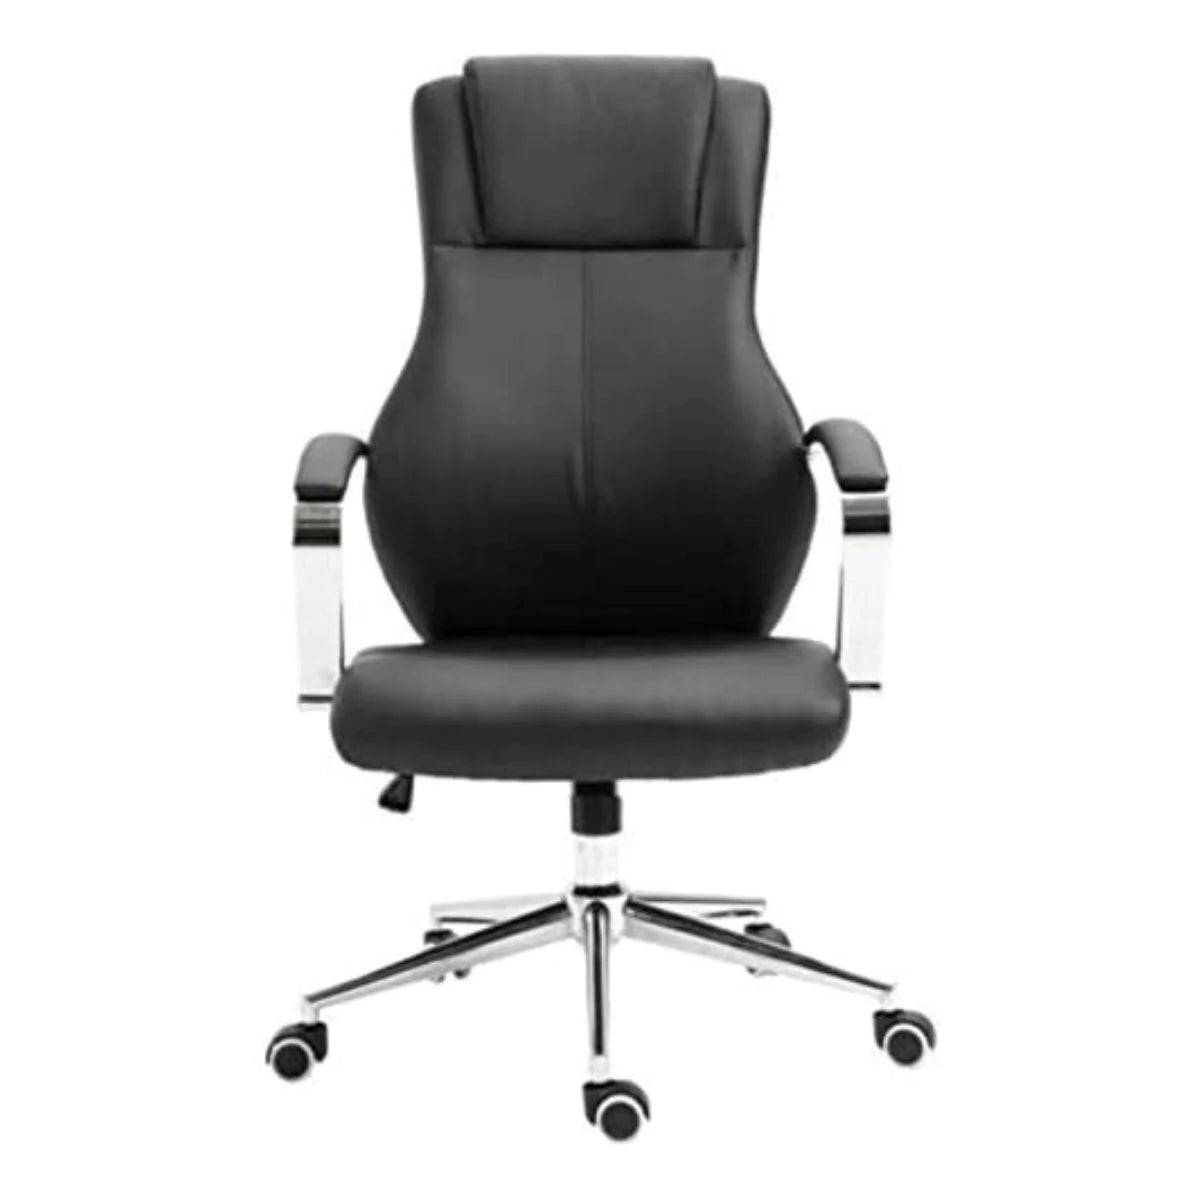 EVRE Office Executive Chair